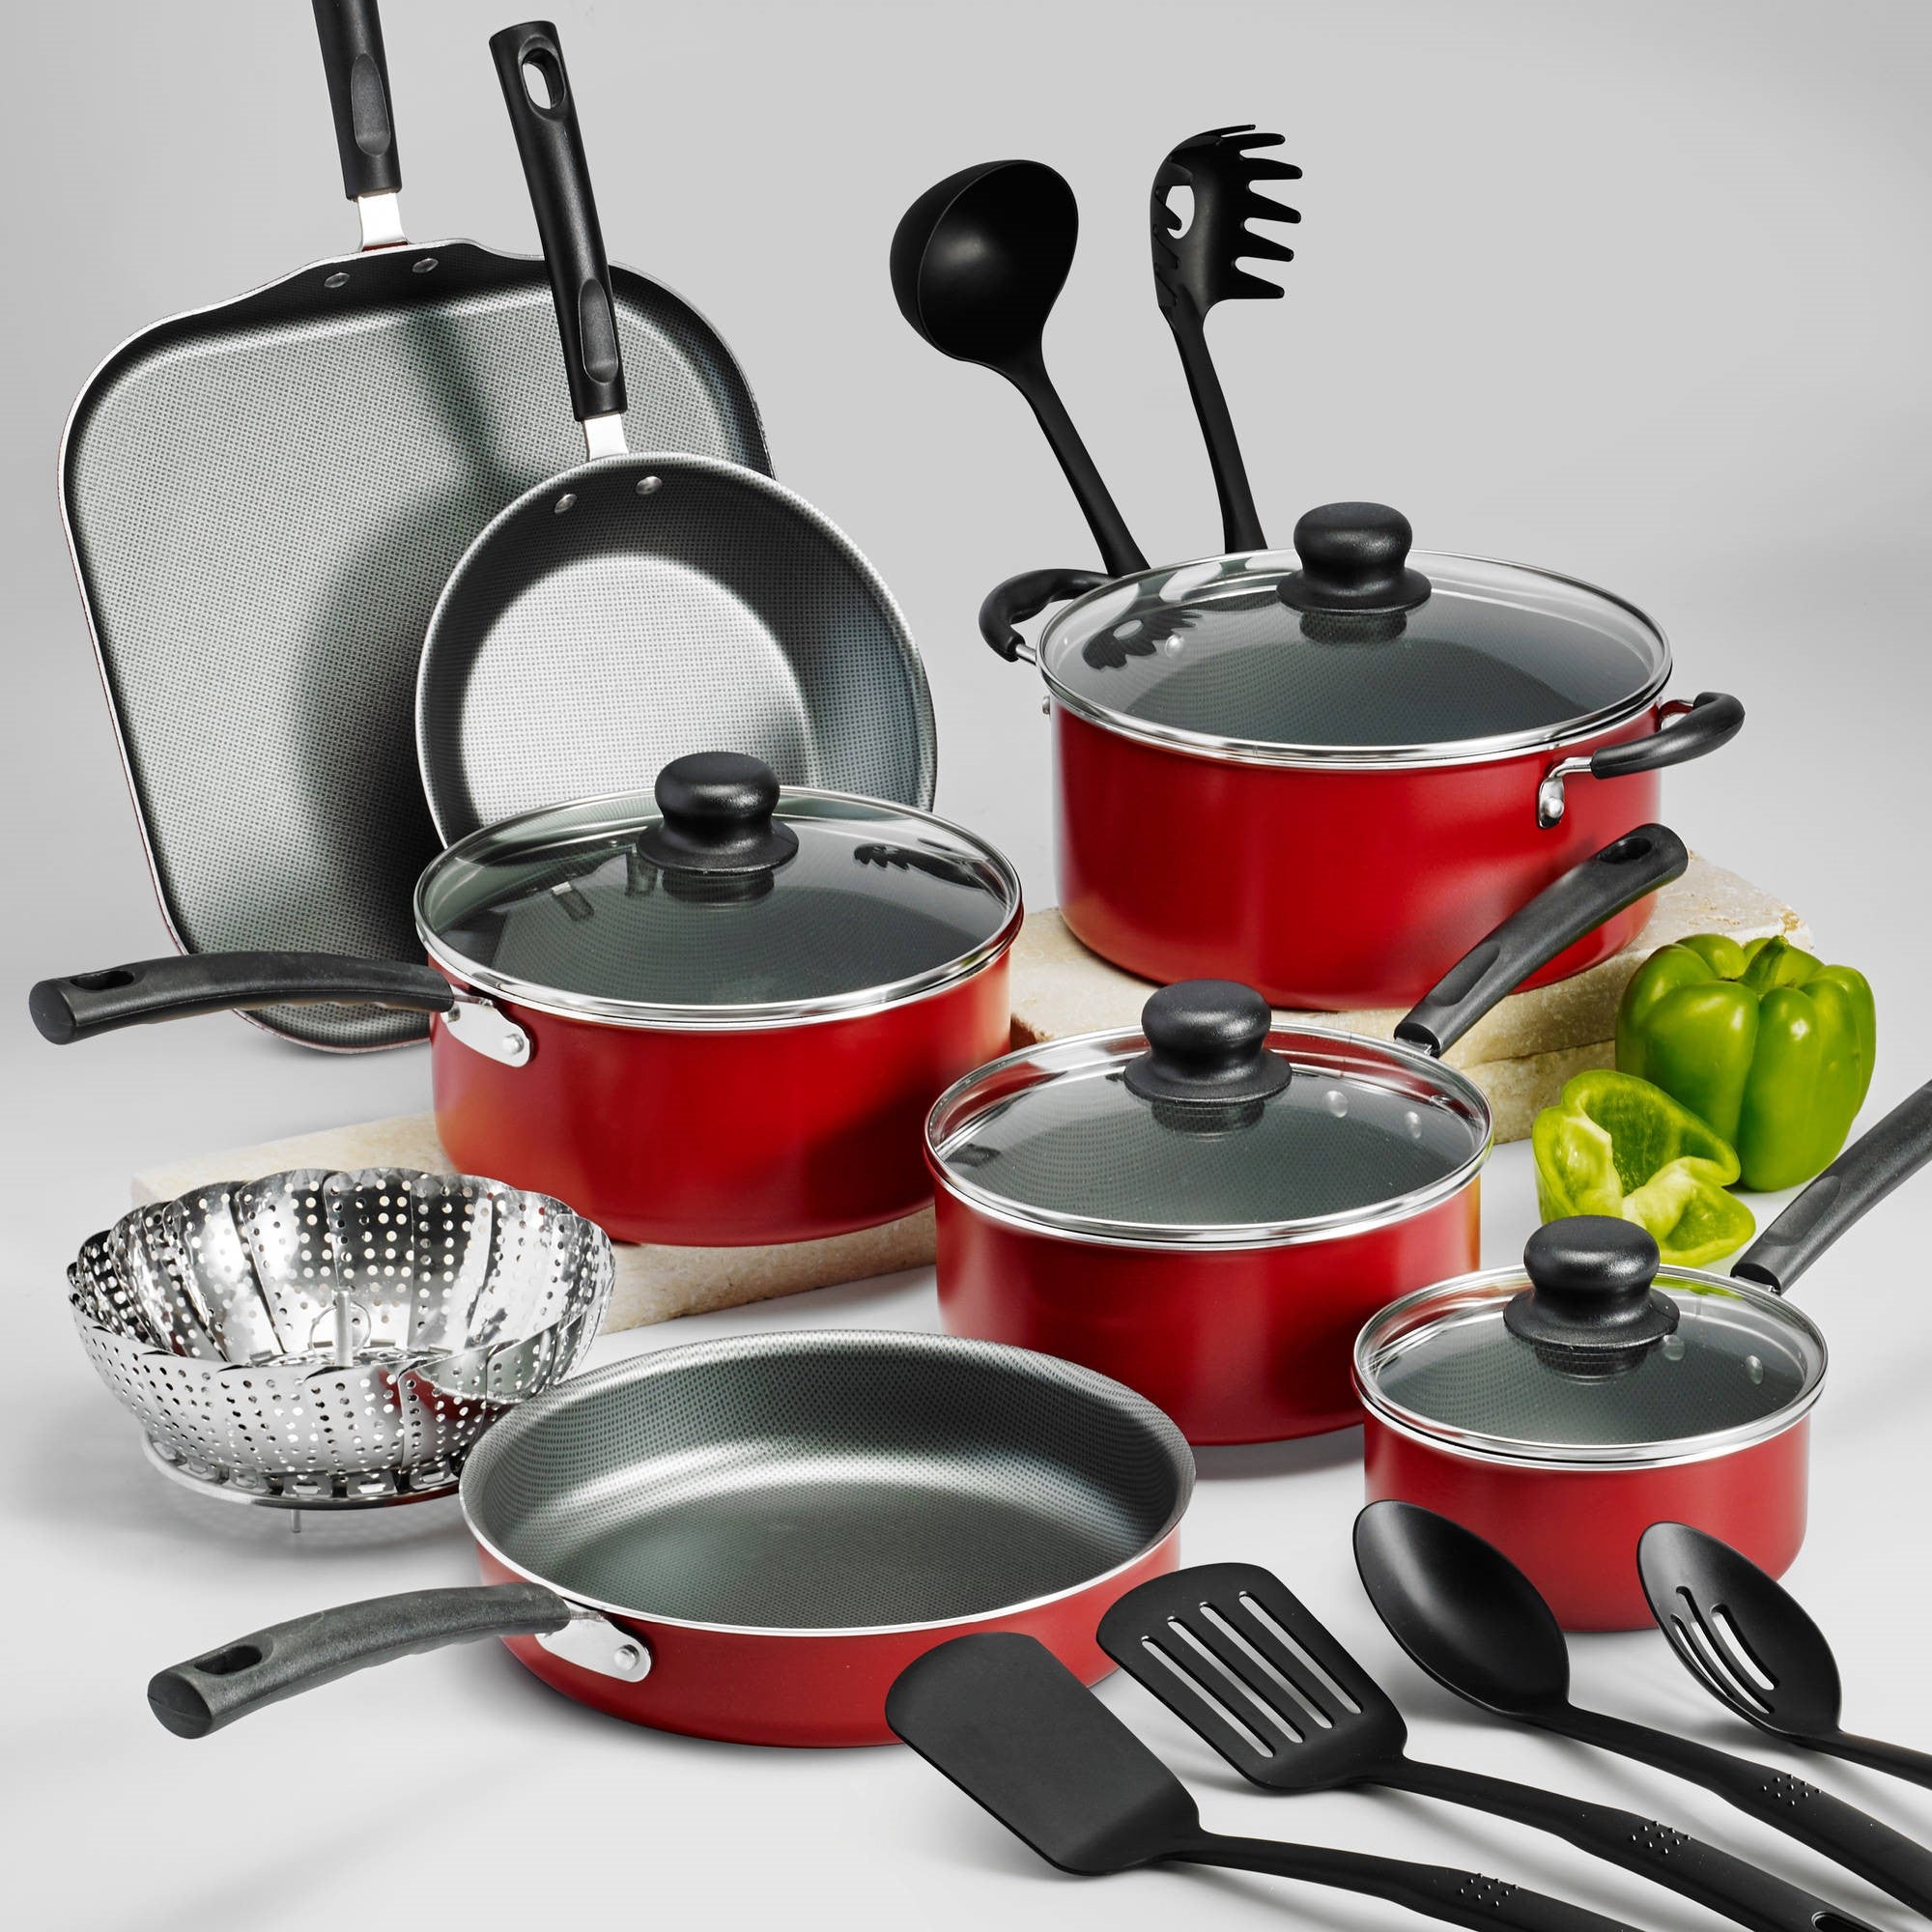 Tramontina 9-Piece Simple Cooking Nonstick Cookware Set, Black/Red